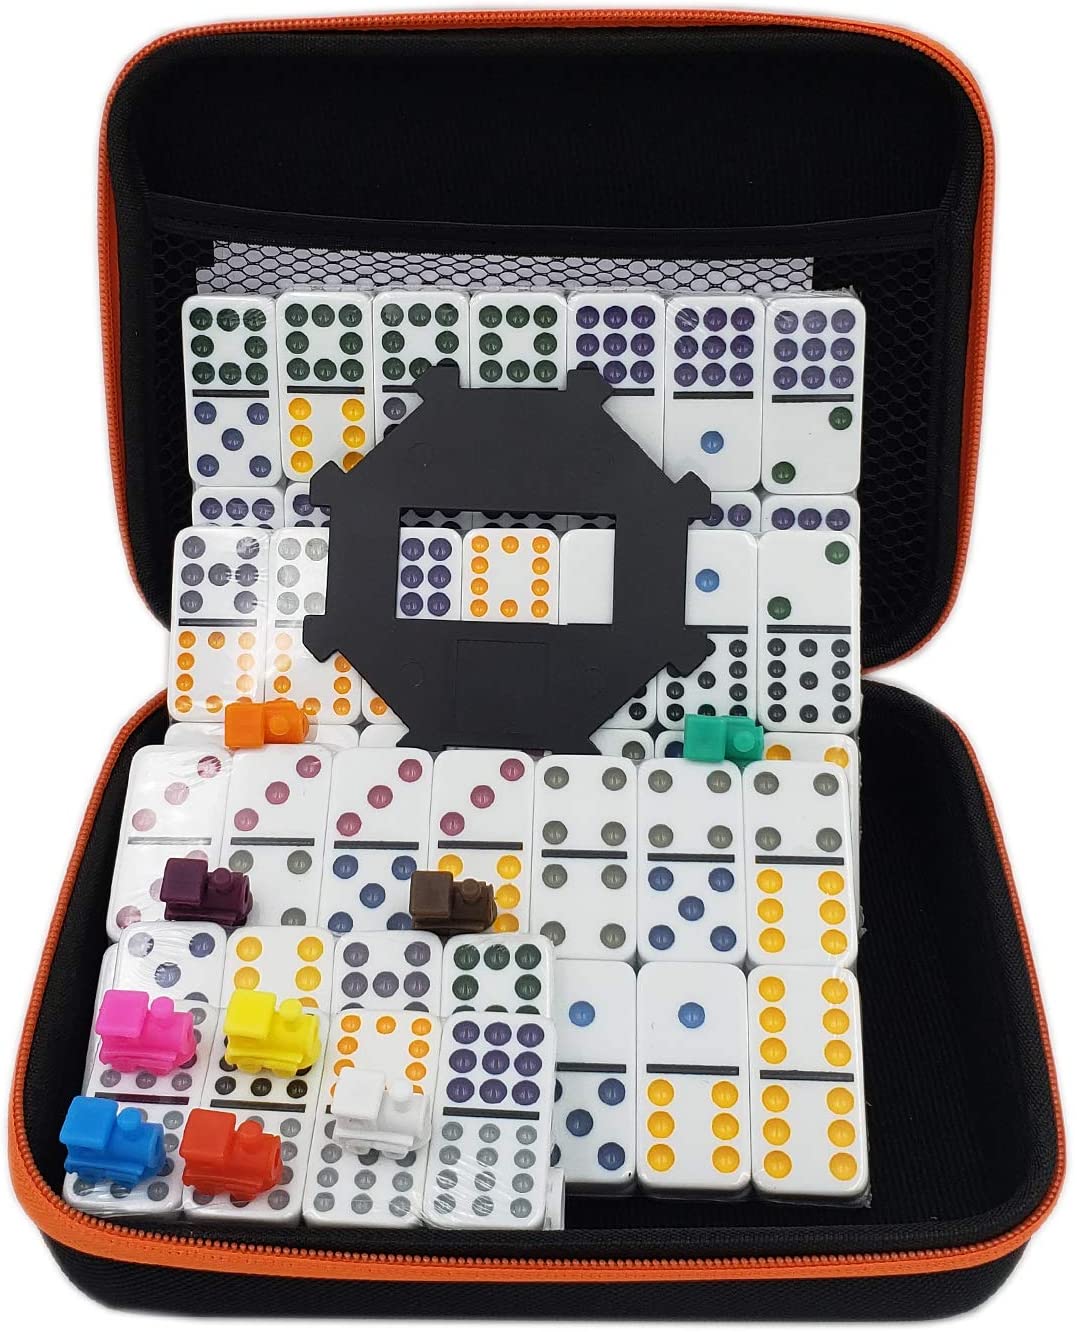 with Instruction Booklet and Score Pads Kalolary Double 12 Mexican Train Dominoes Game Accessories in an Aluminum Case 91 Tiles